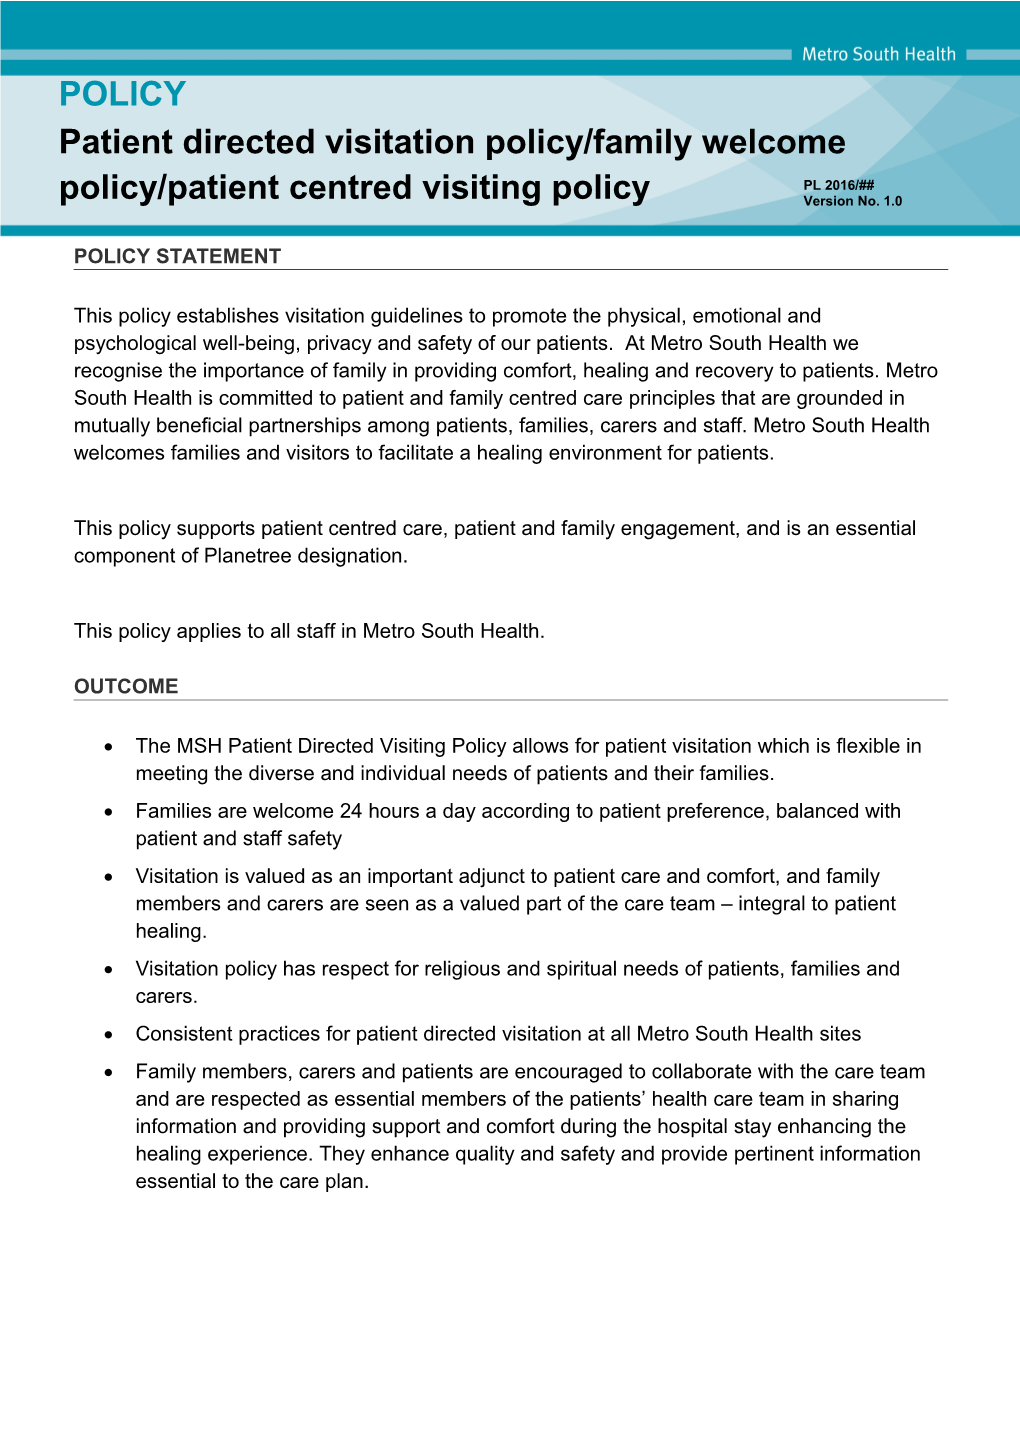 Metro South Health Policy - Policy Template